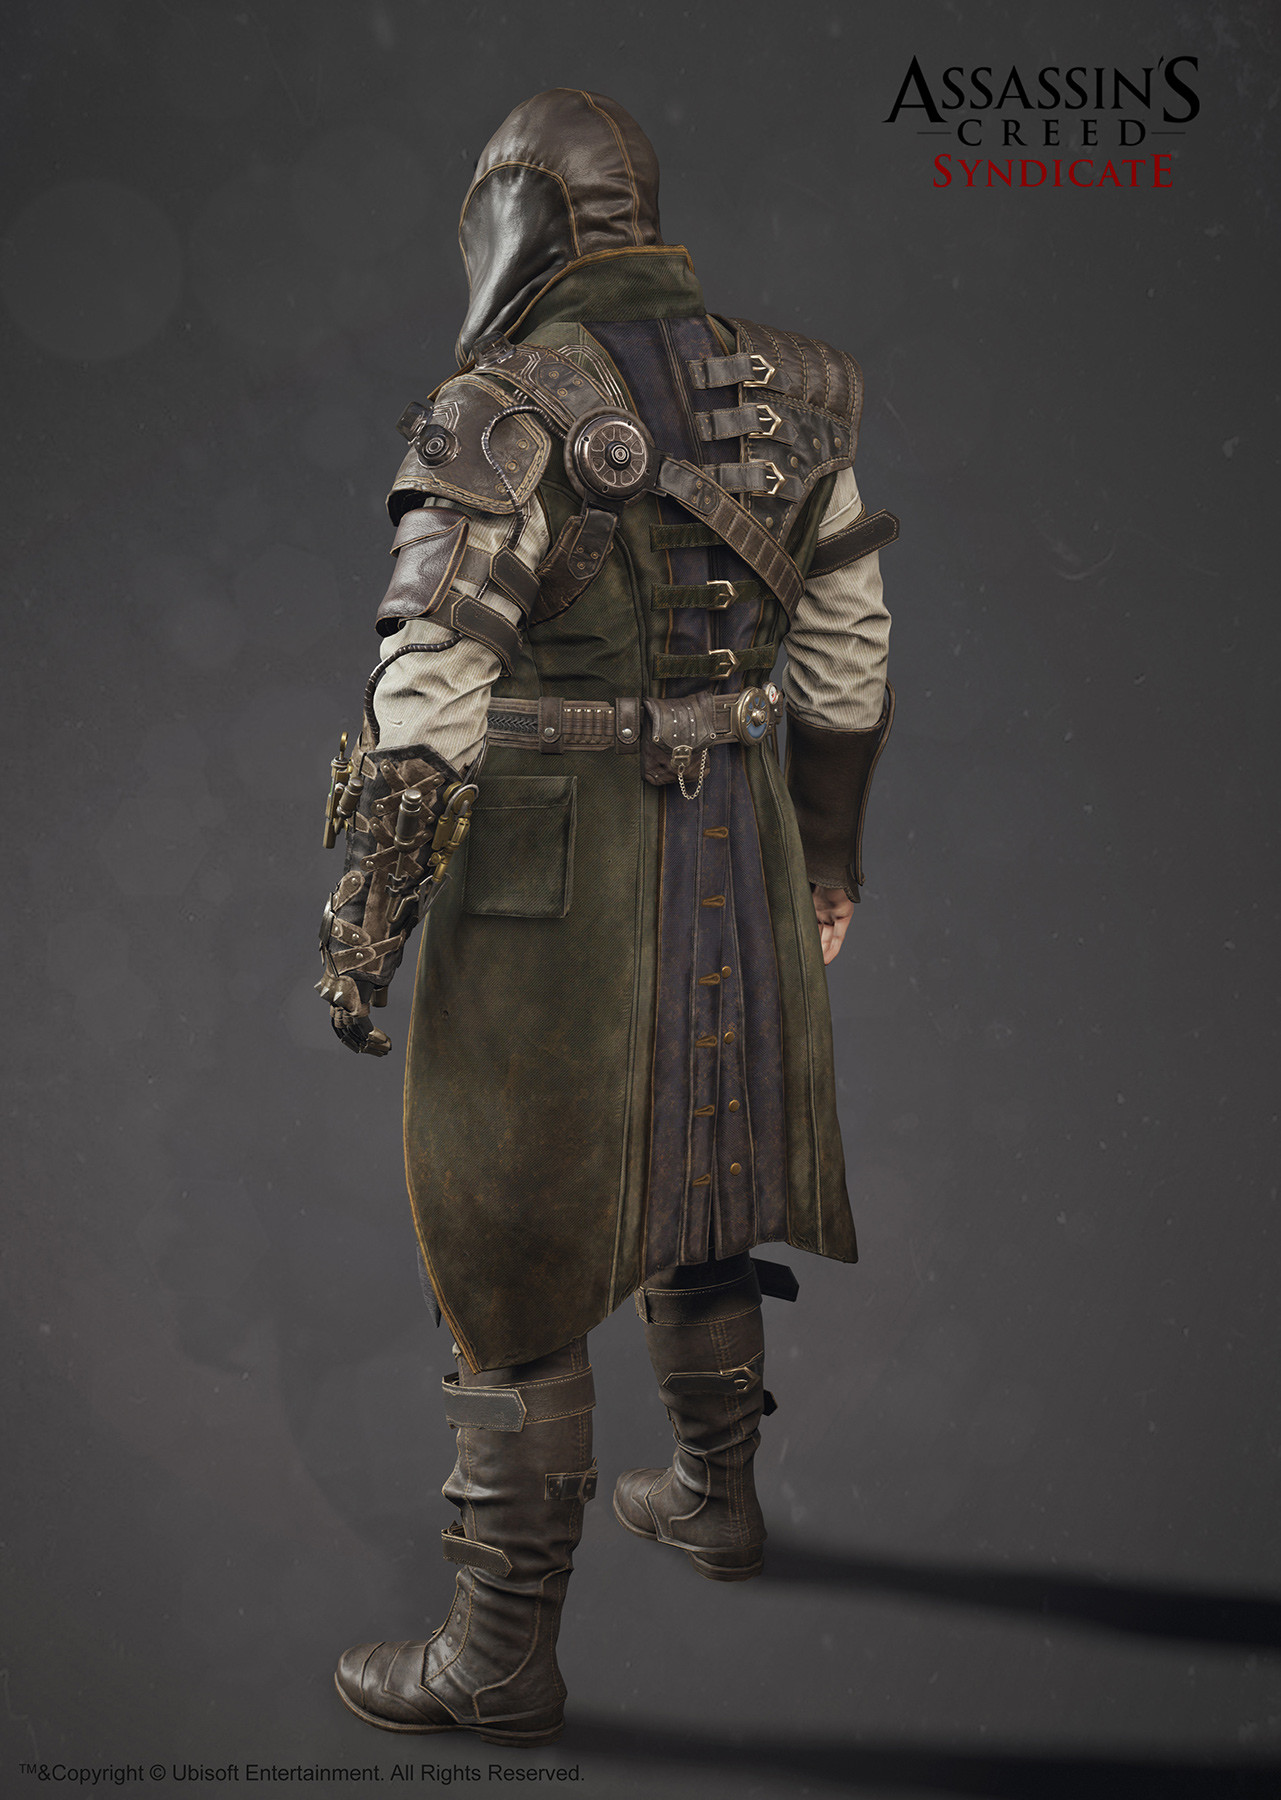 Alexis Belley - assassin's creed Syndicate steampunk jacob